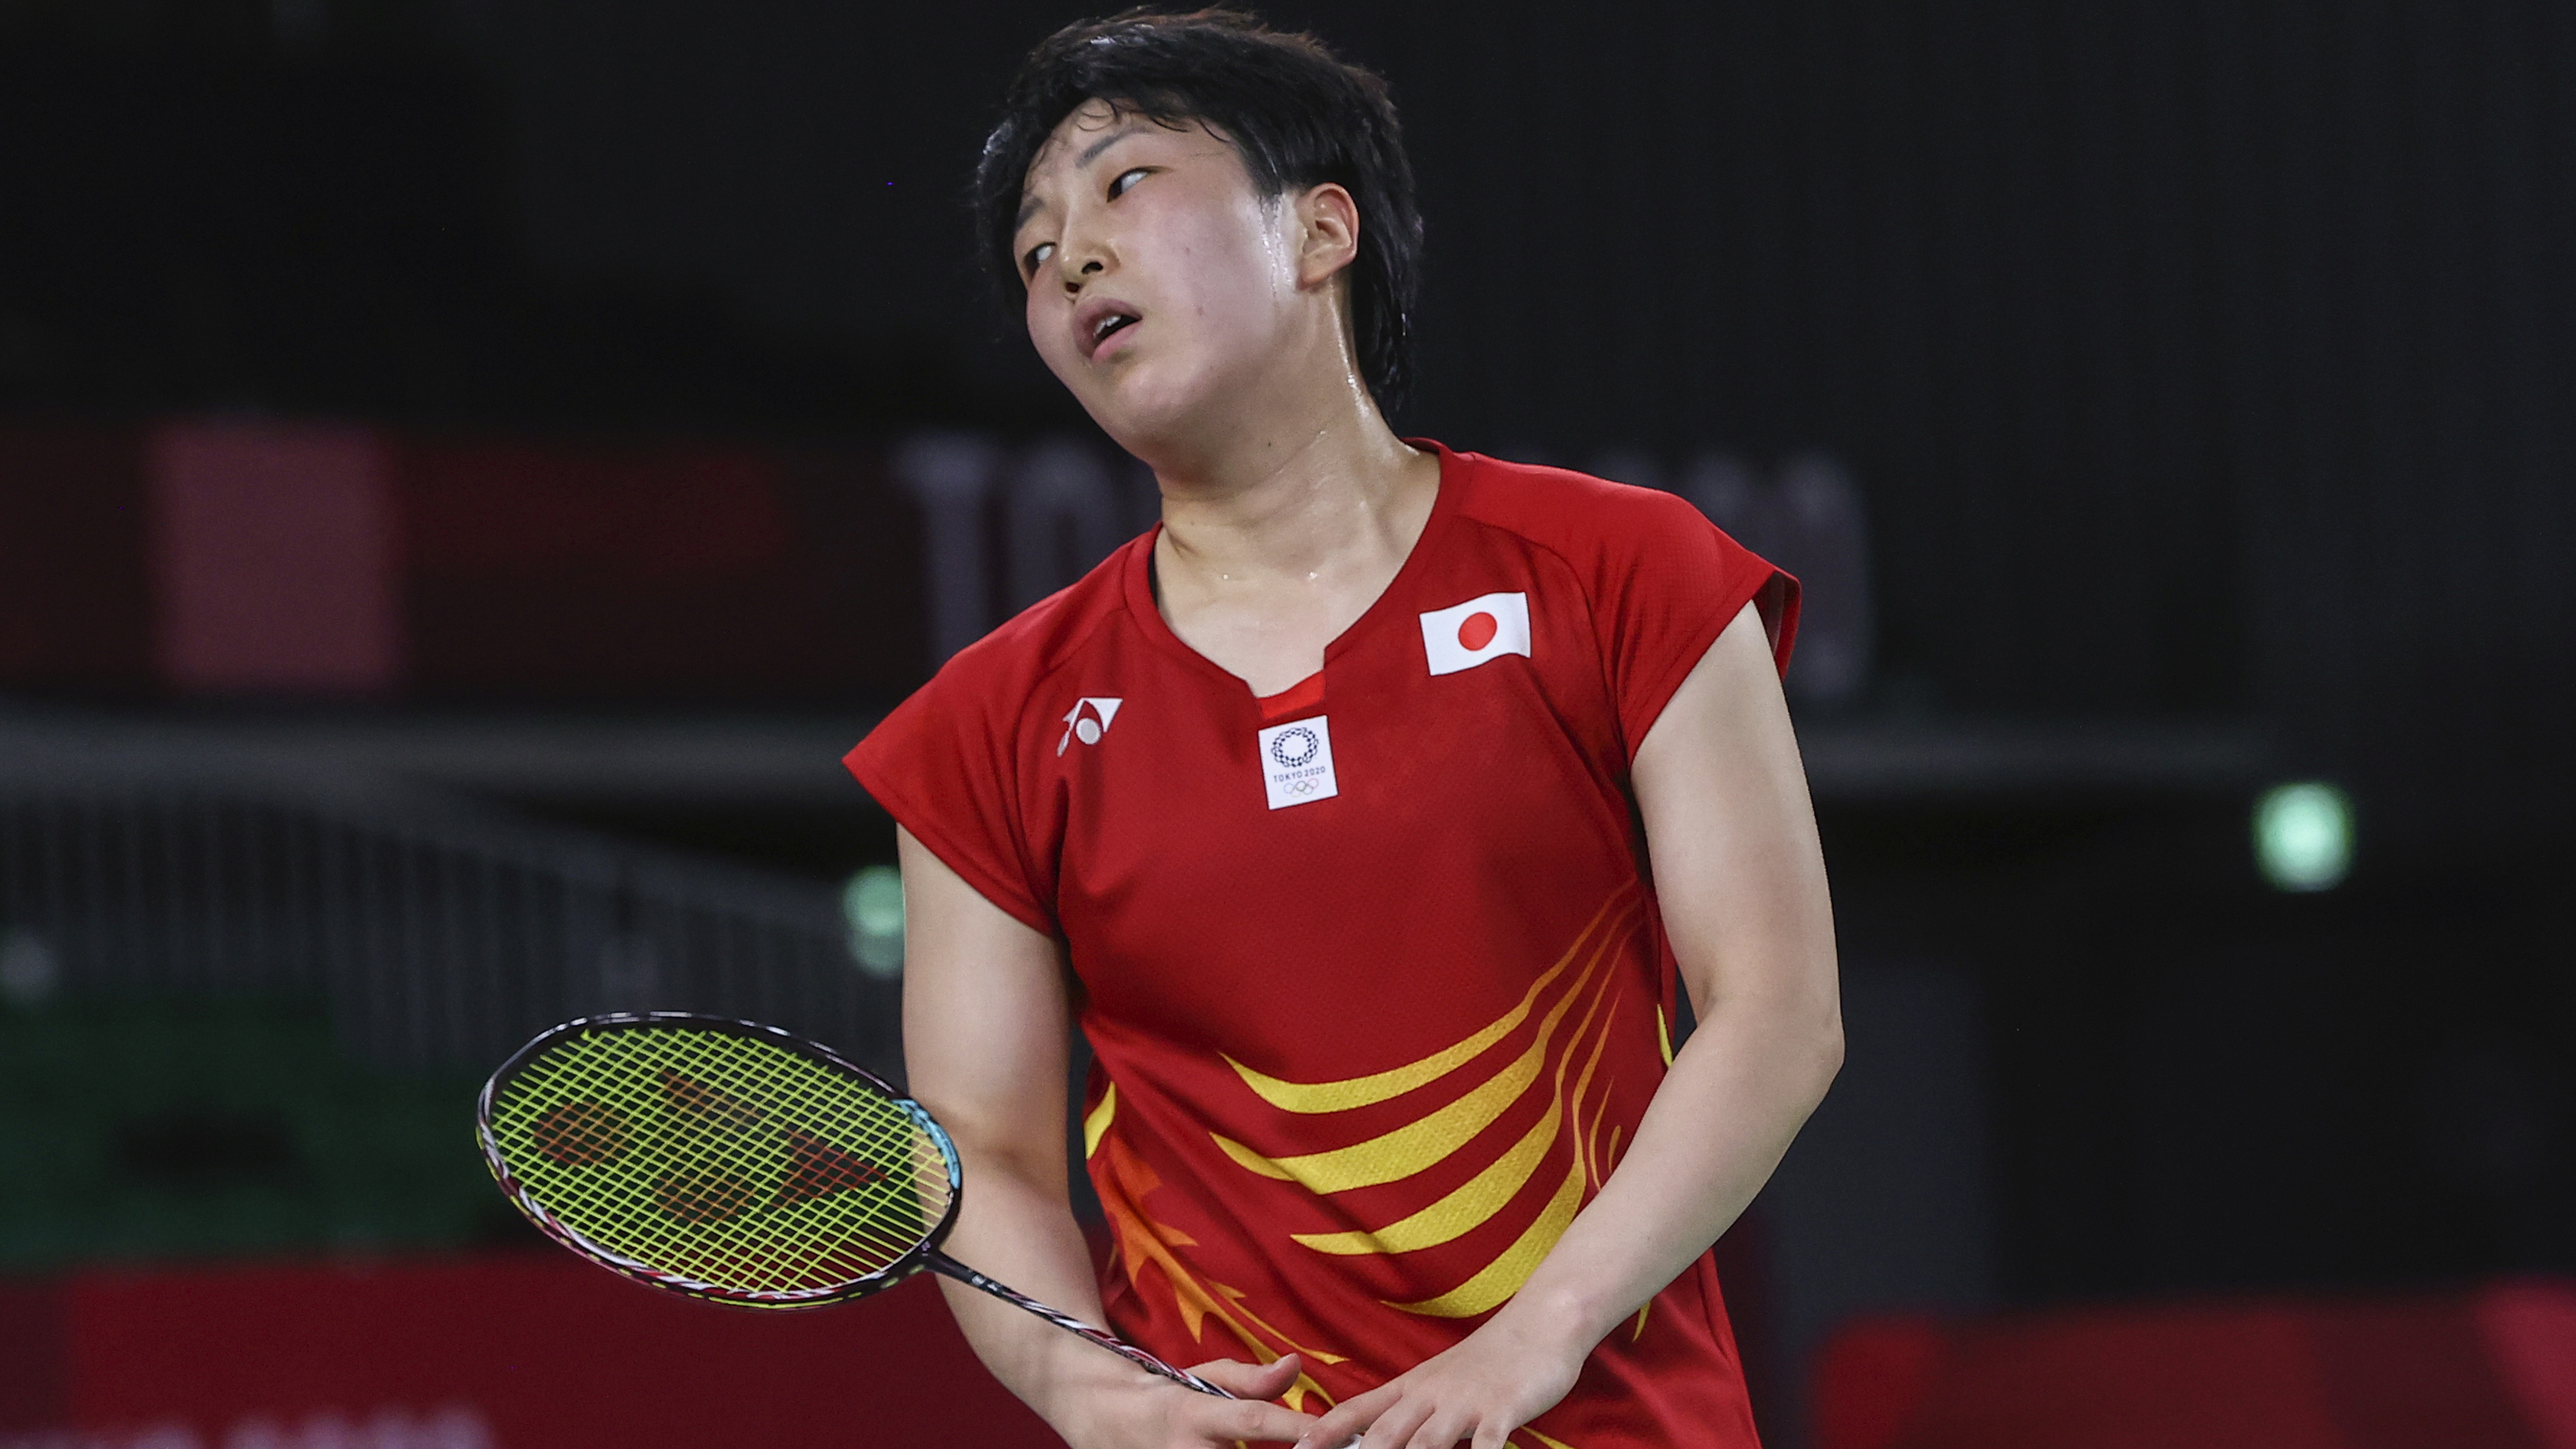 Tokyo 2020 Olympics - Badminton - Women's Singles - Quarterfinal - MFS - Musashino Forest Sport Plaza, Tokyo, Japan – July 30, 2021. Akane Yamaguchi of Japan reacts during the match against P.V. Sindhu of India. REUTERS/Leonhard Foeger